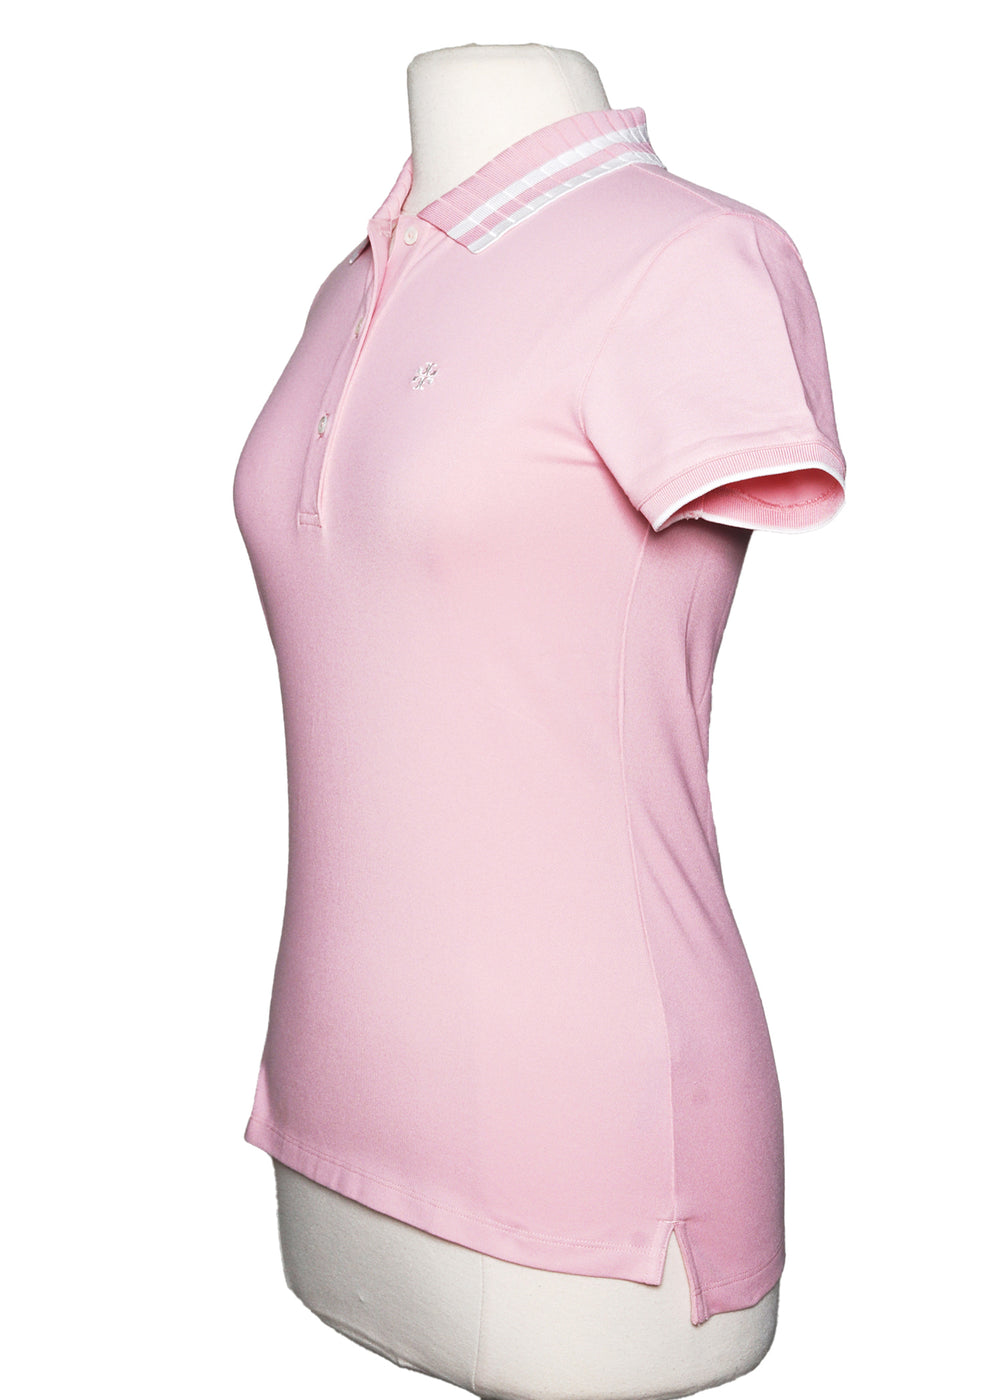 Tory Sport Pique Pleated Colar Polo - Pink/White - Size Small - Skorzie